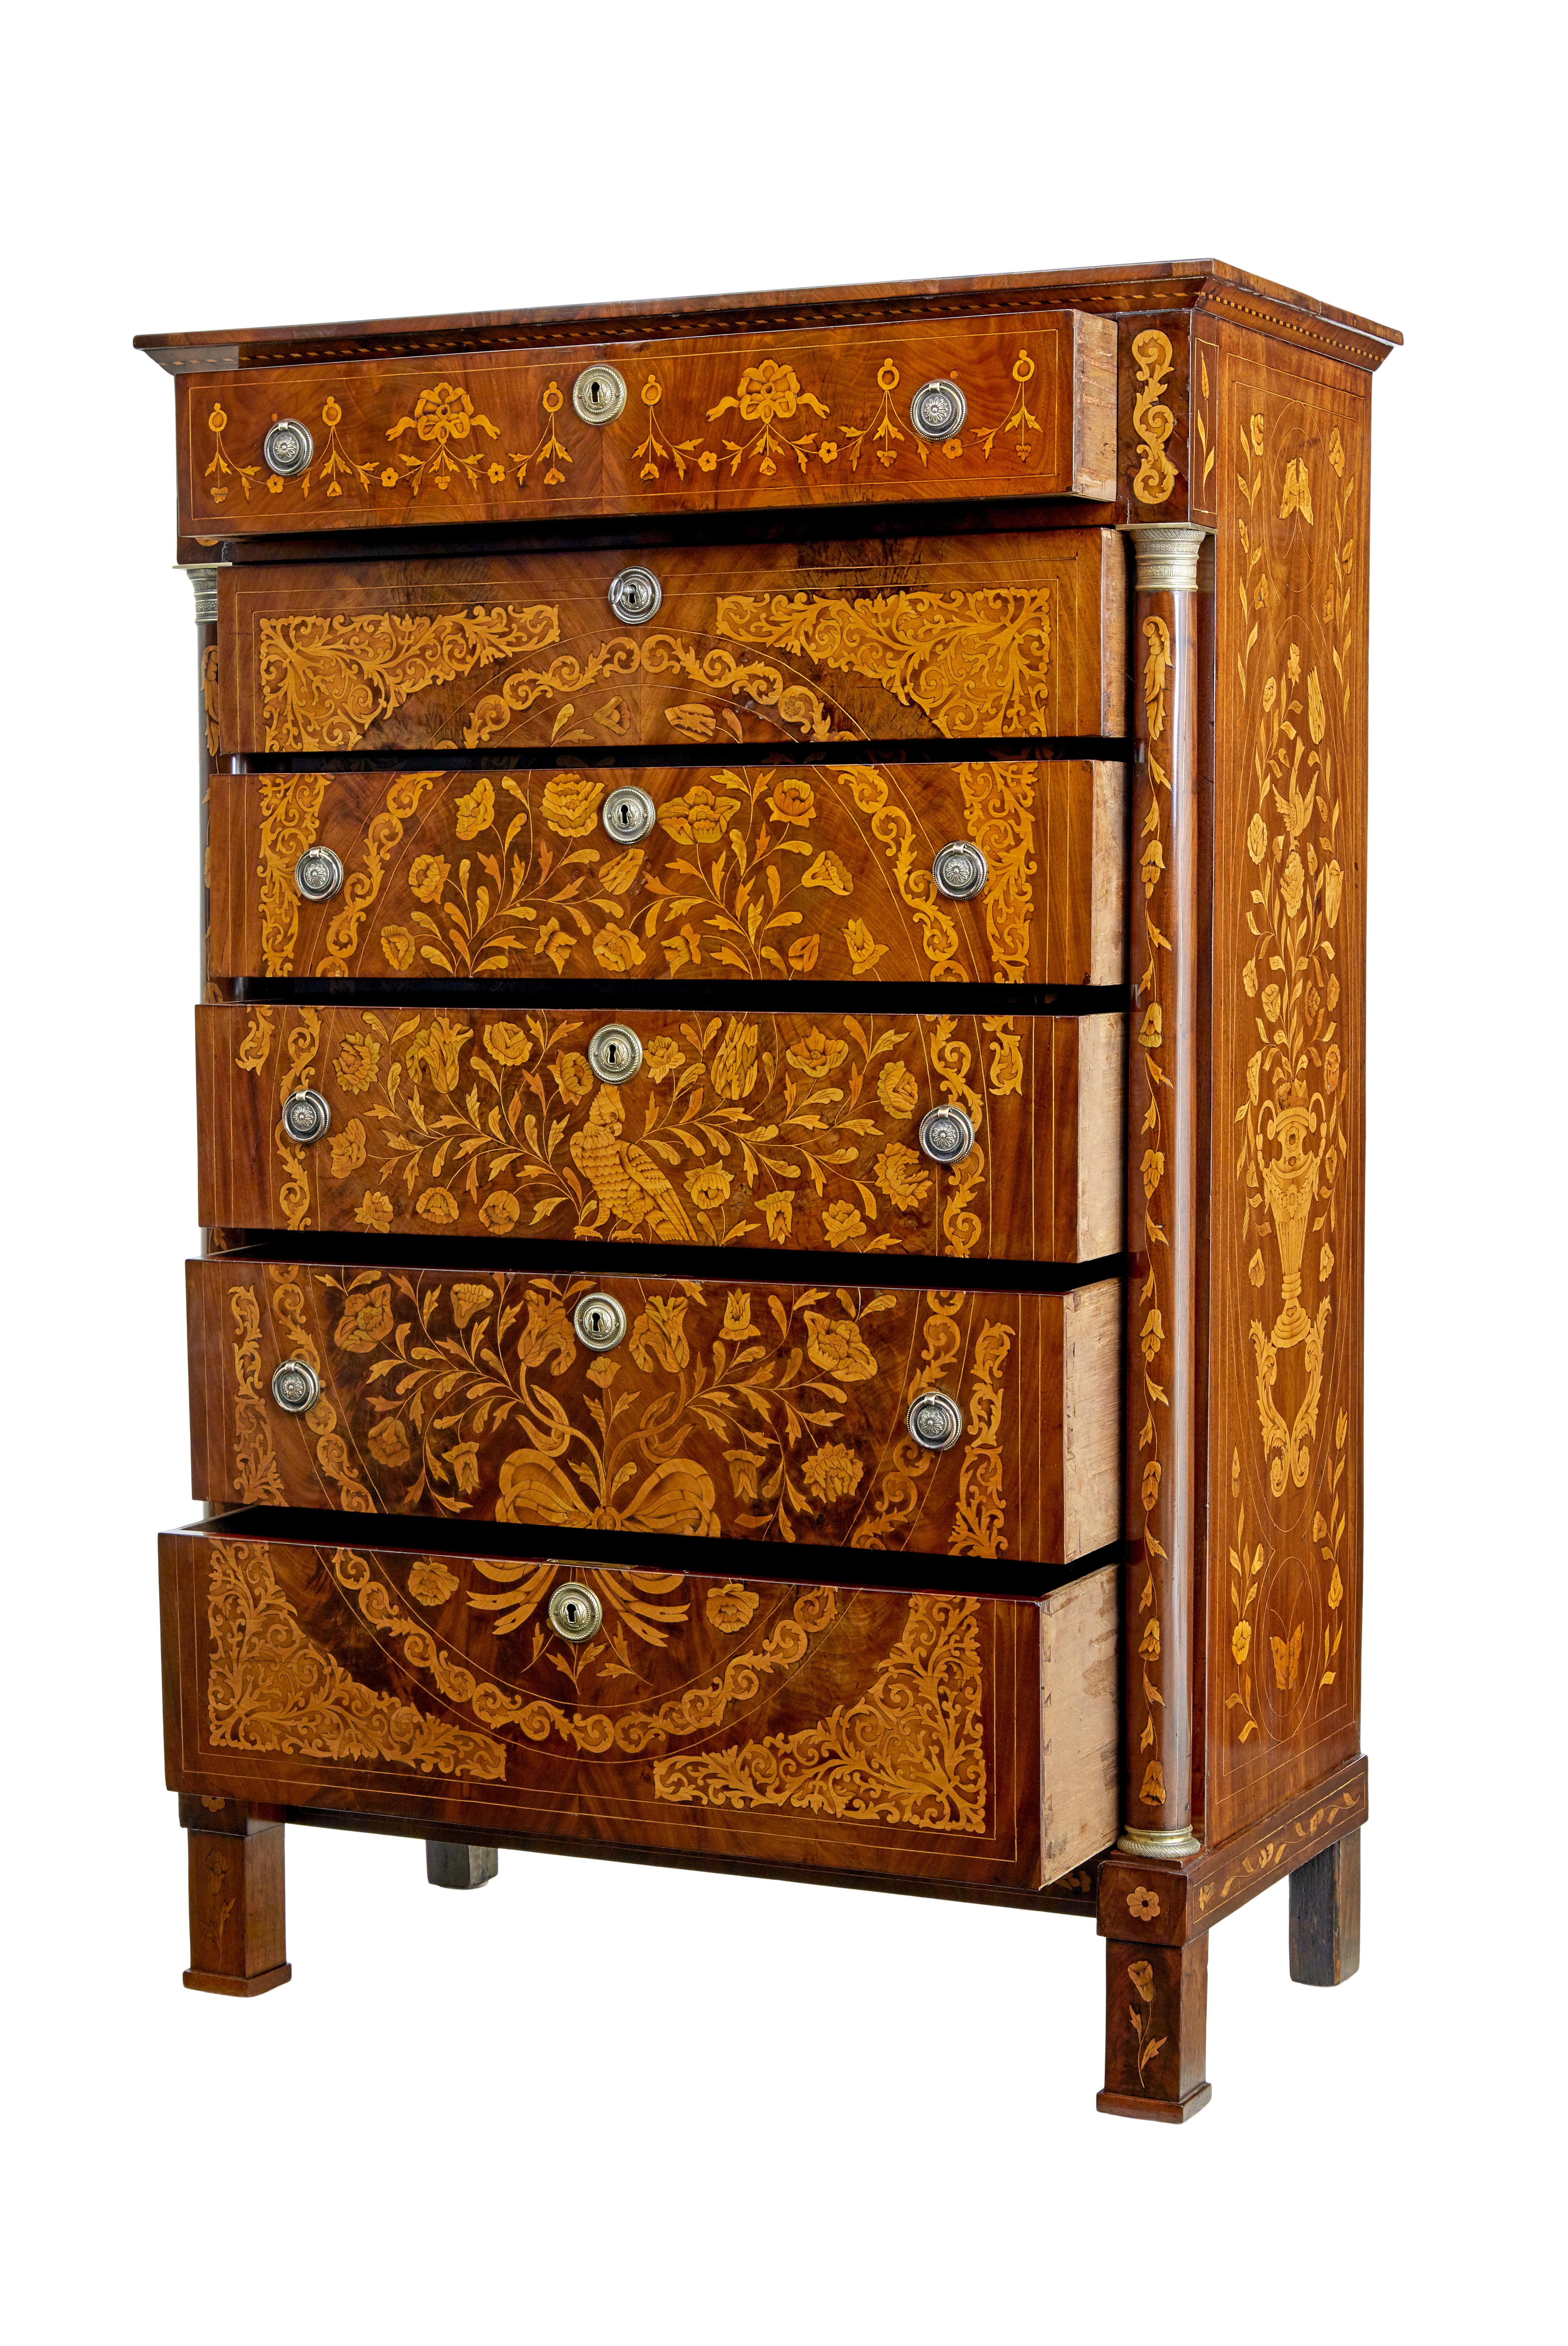 19th century french inlaid mahogany 6-drawer inlaid chest, circa 1830.

Early 19th century inlaid french mahogany 6-drawer chest with inlaid turned columns. Profusely inlaid on all surfaces with foliage, birds and butterflies. Later handles, as this